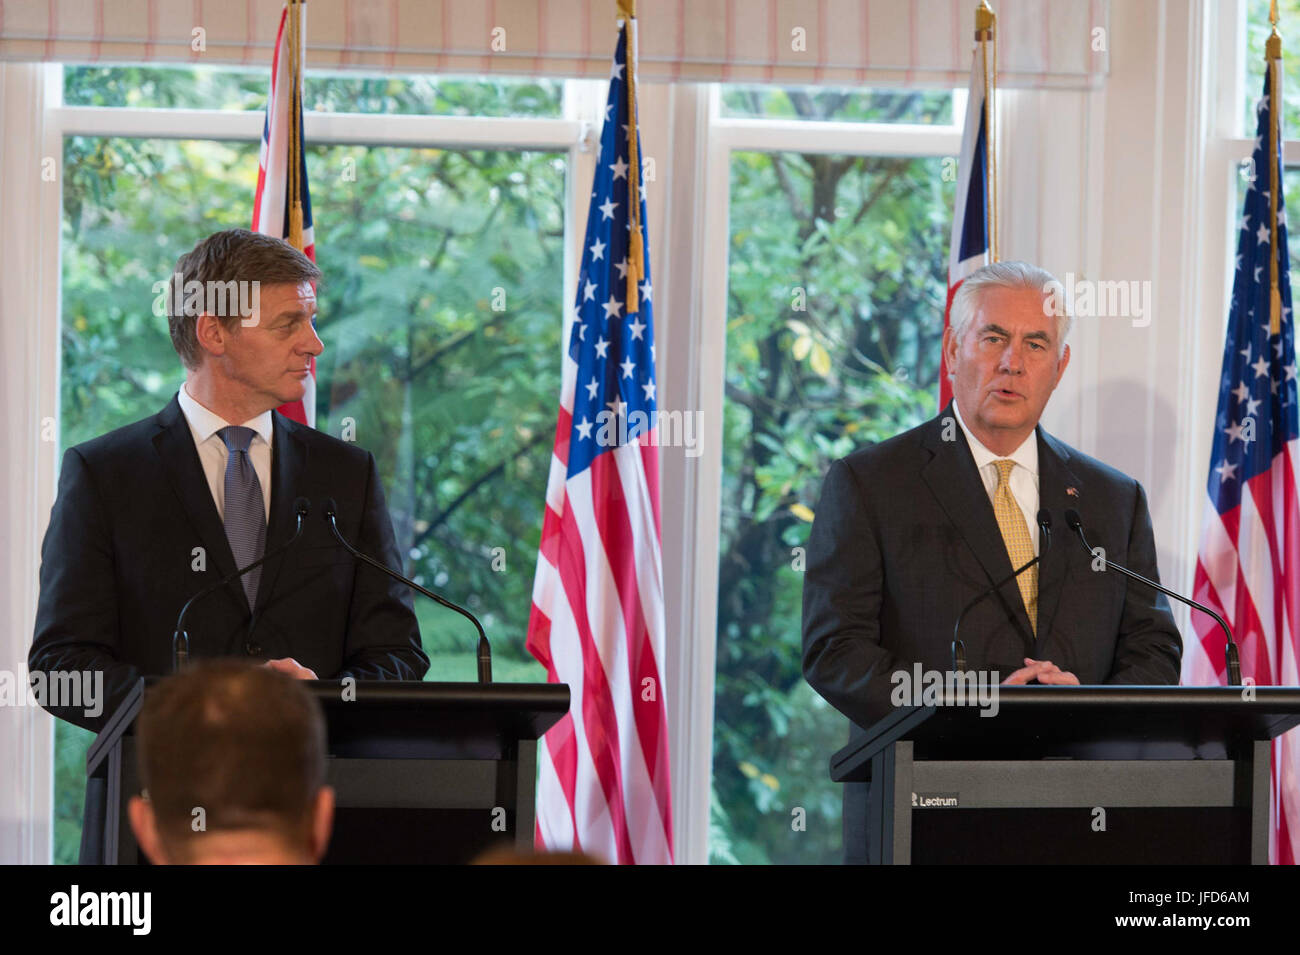 U.S. Secretary of State Rex Tillerson delivers remarks during a press conference with New Zealander Prime Minister Bill English in Wellington, New Zealand, on June 6, 2017. Stock Photo